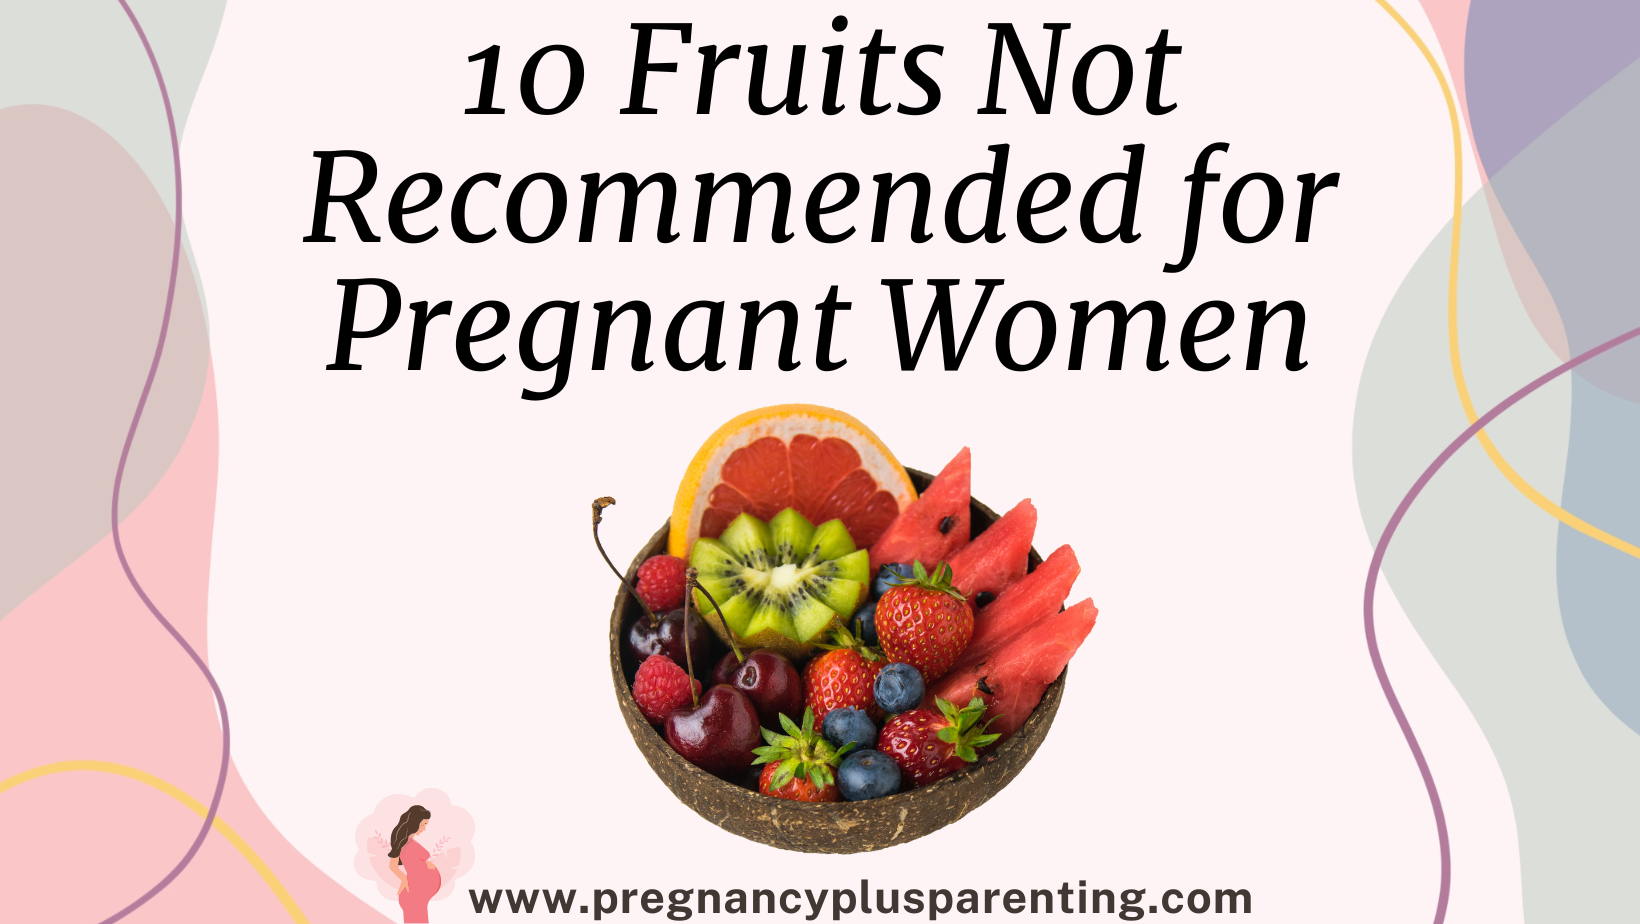 10 Fruits Not Recommended for Pregnant Women